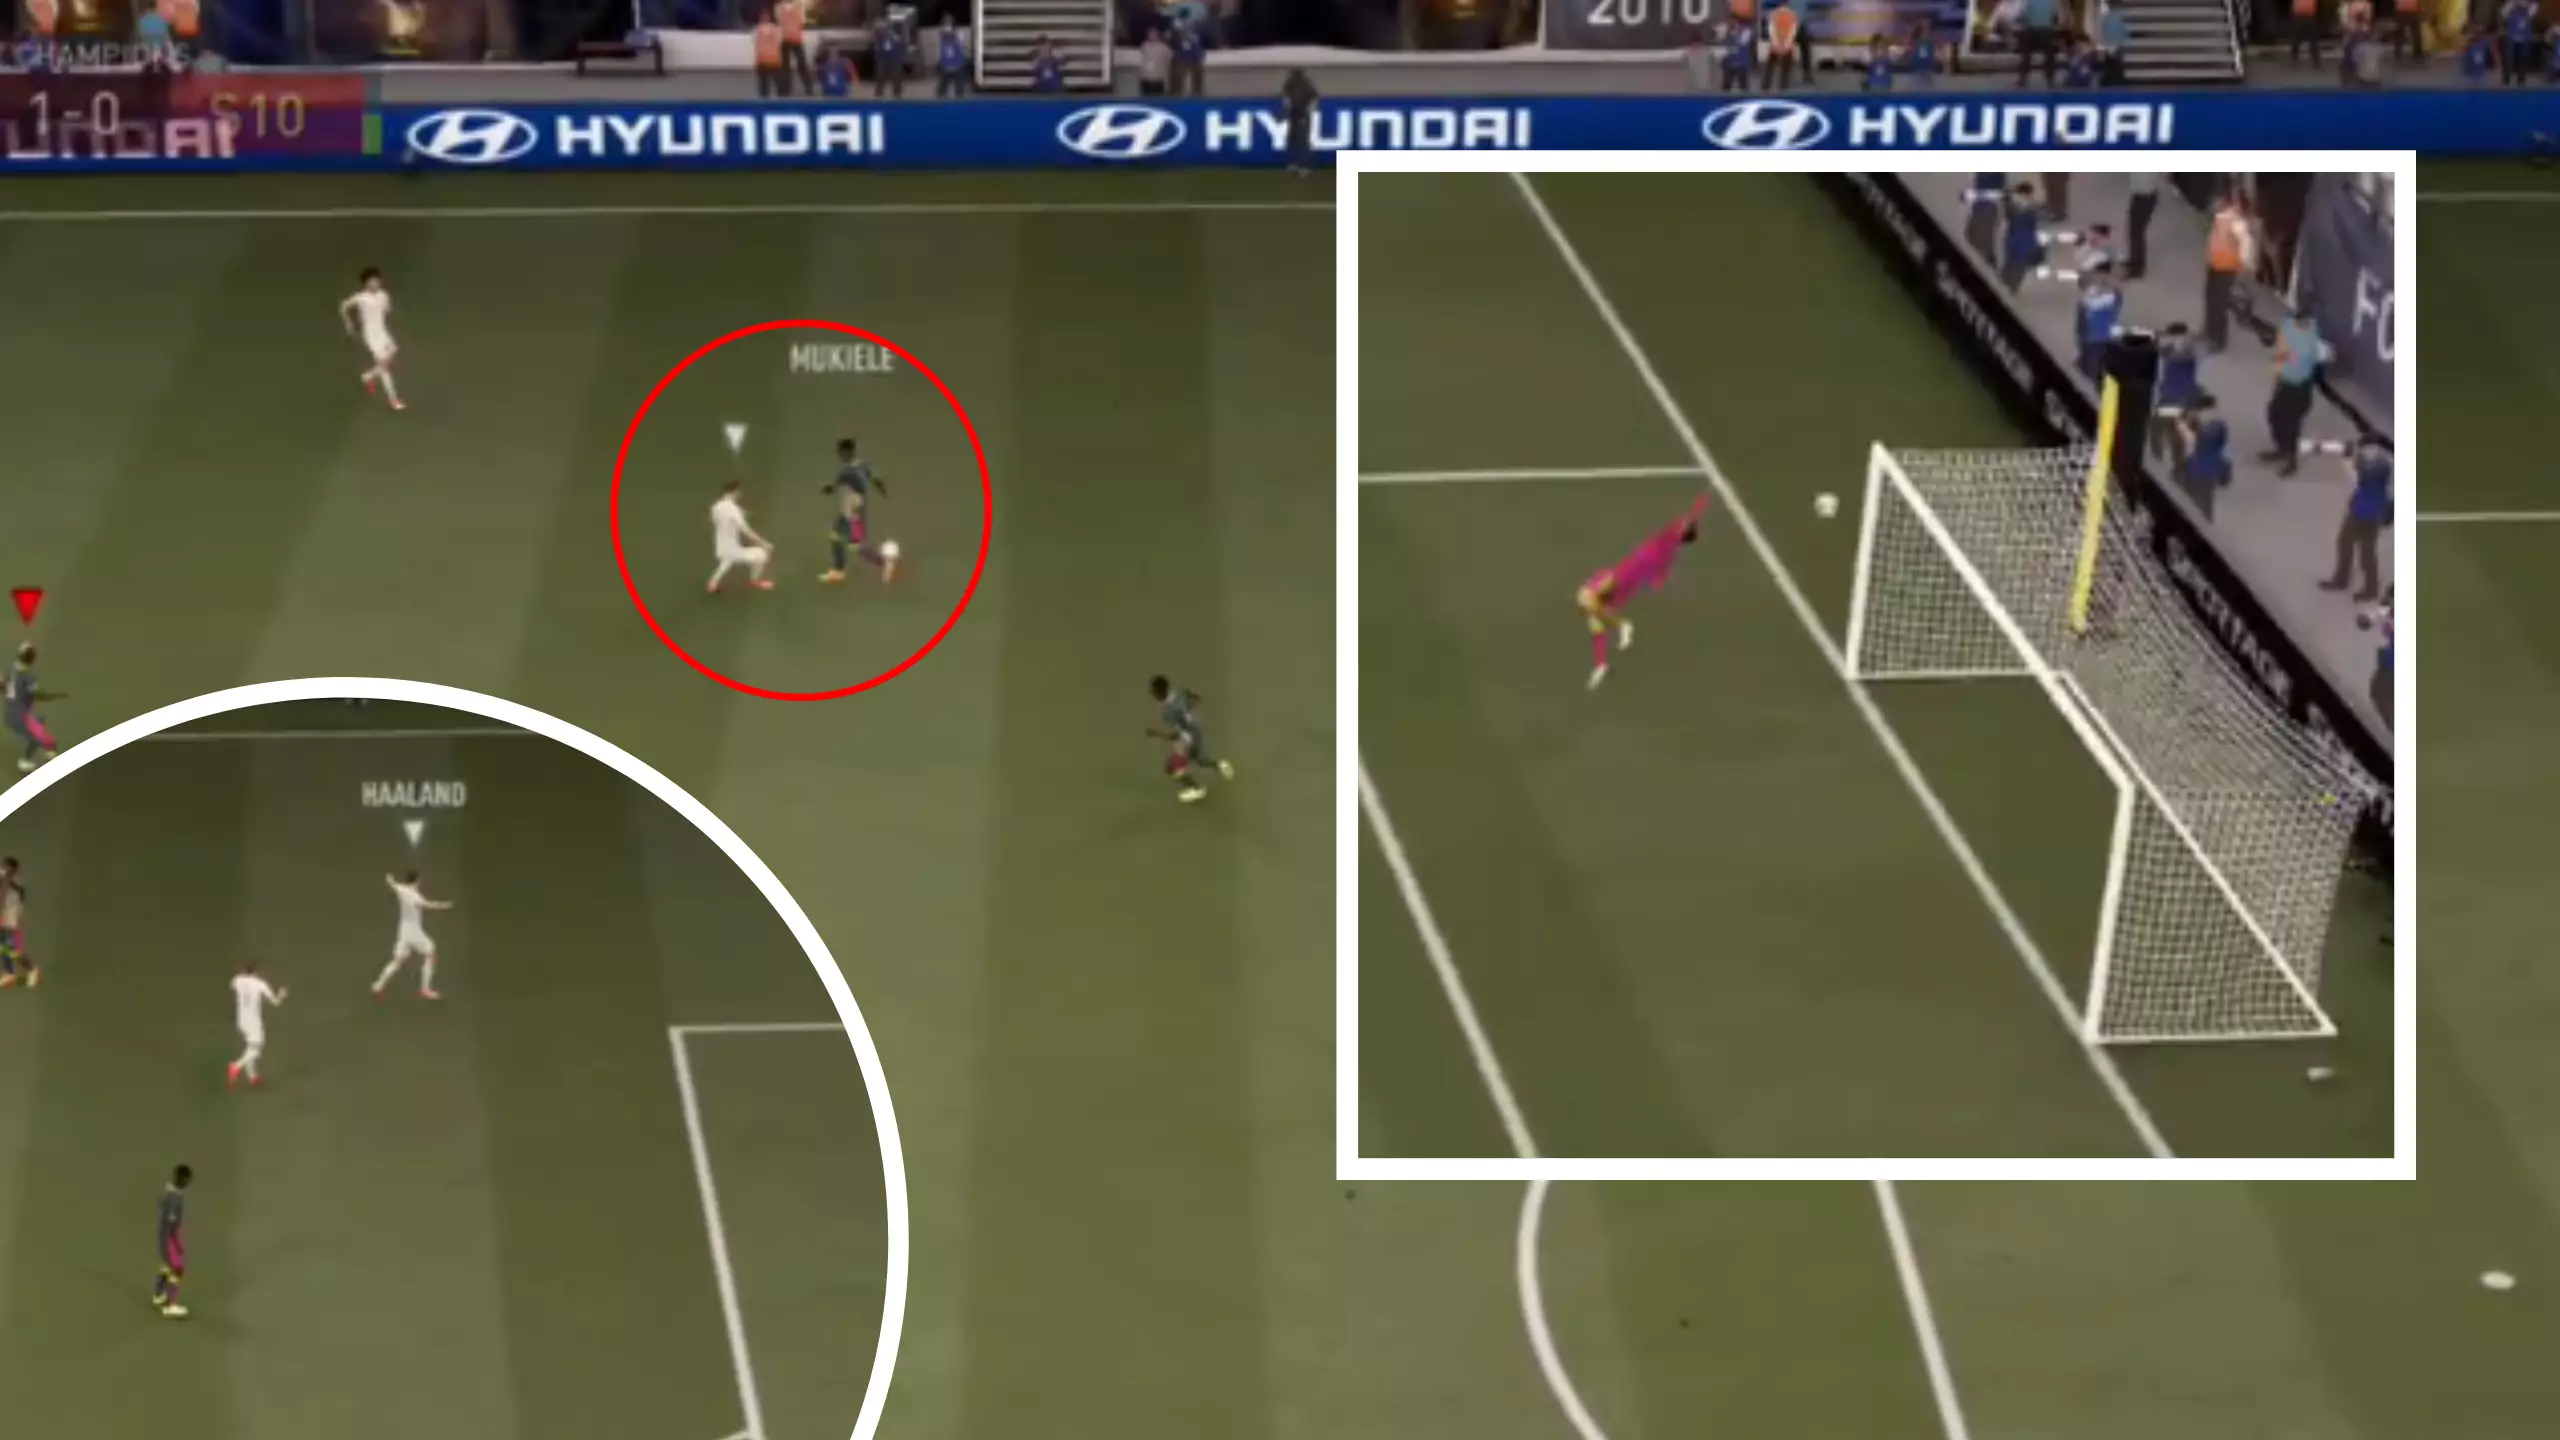 FIFA 21 Glitch Sees Erling Haaland Score An Absolute Rocket By Making A Tackle